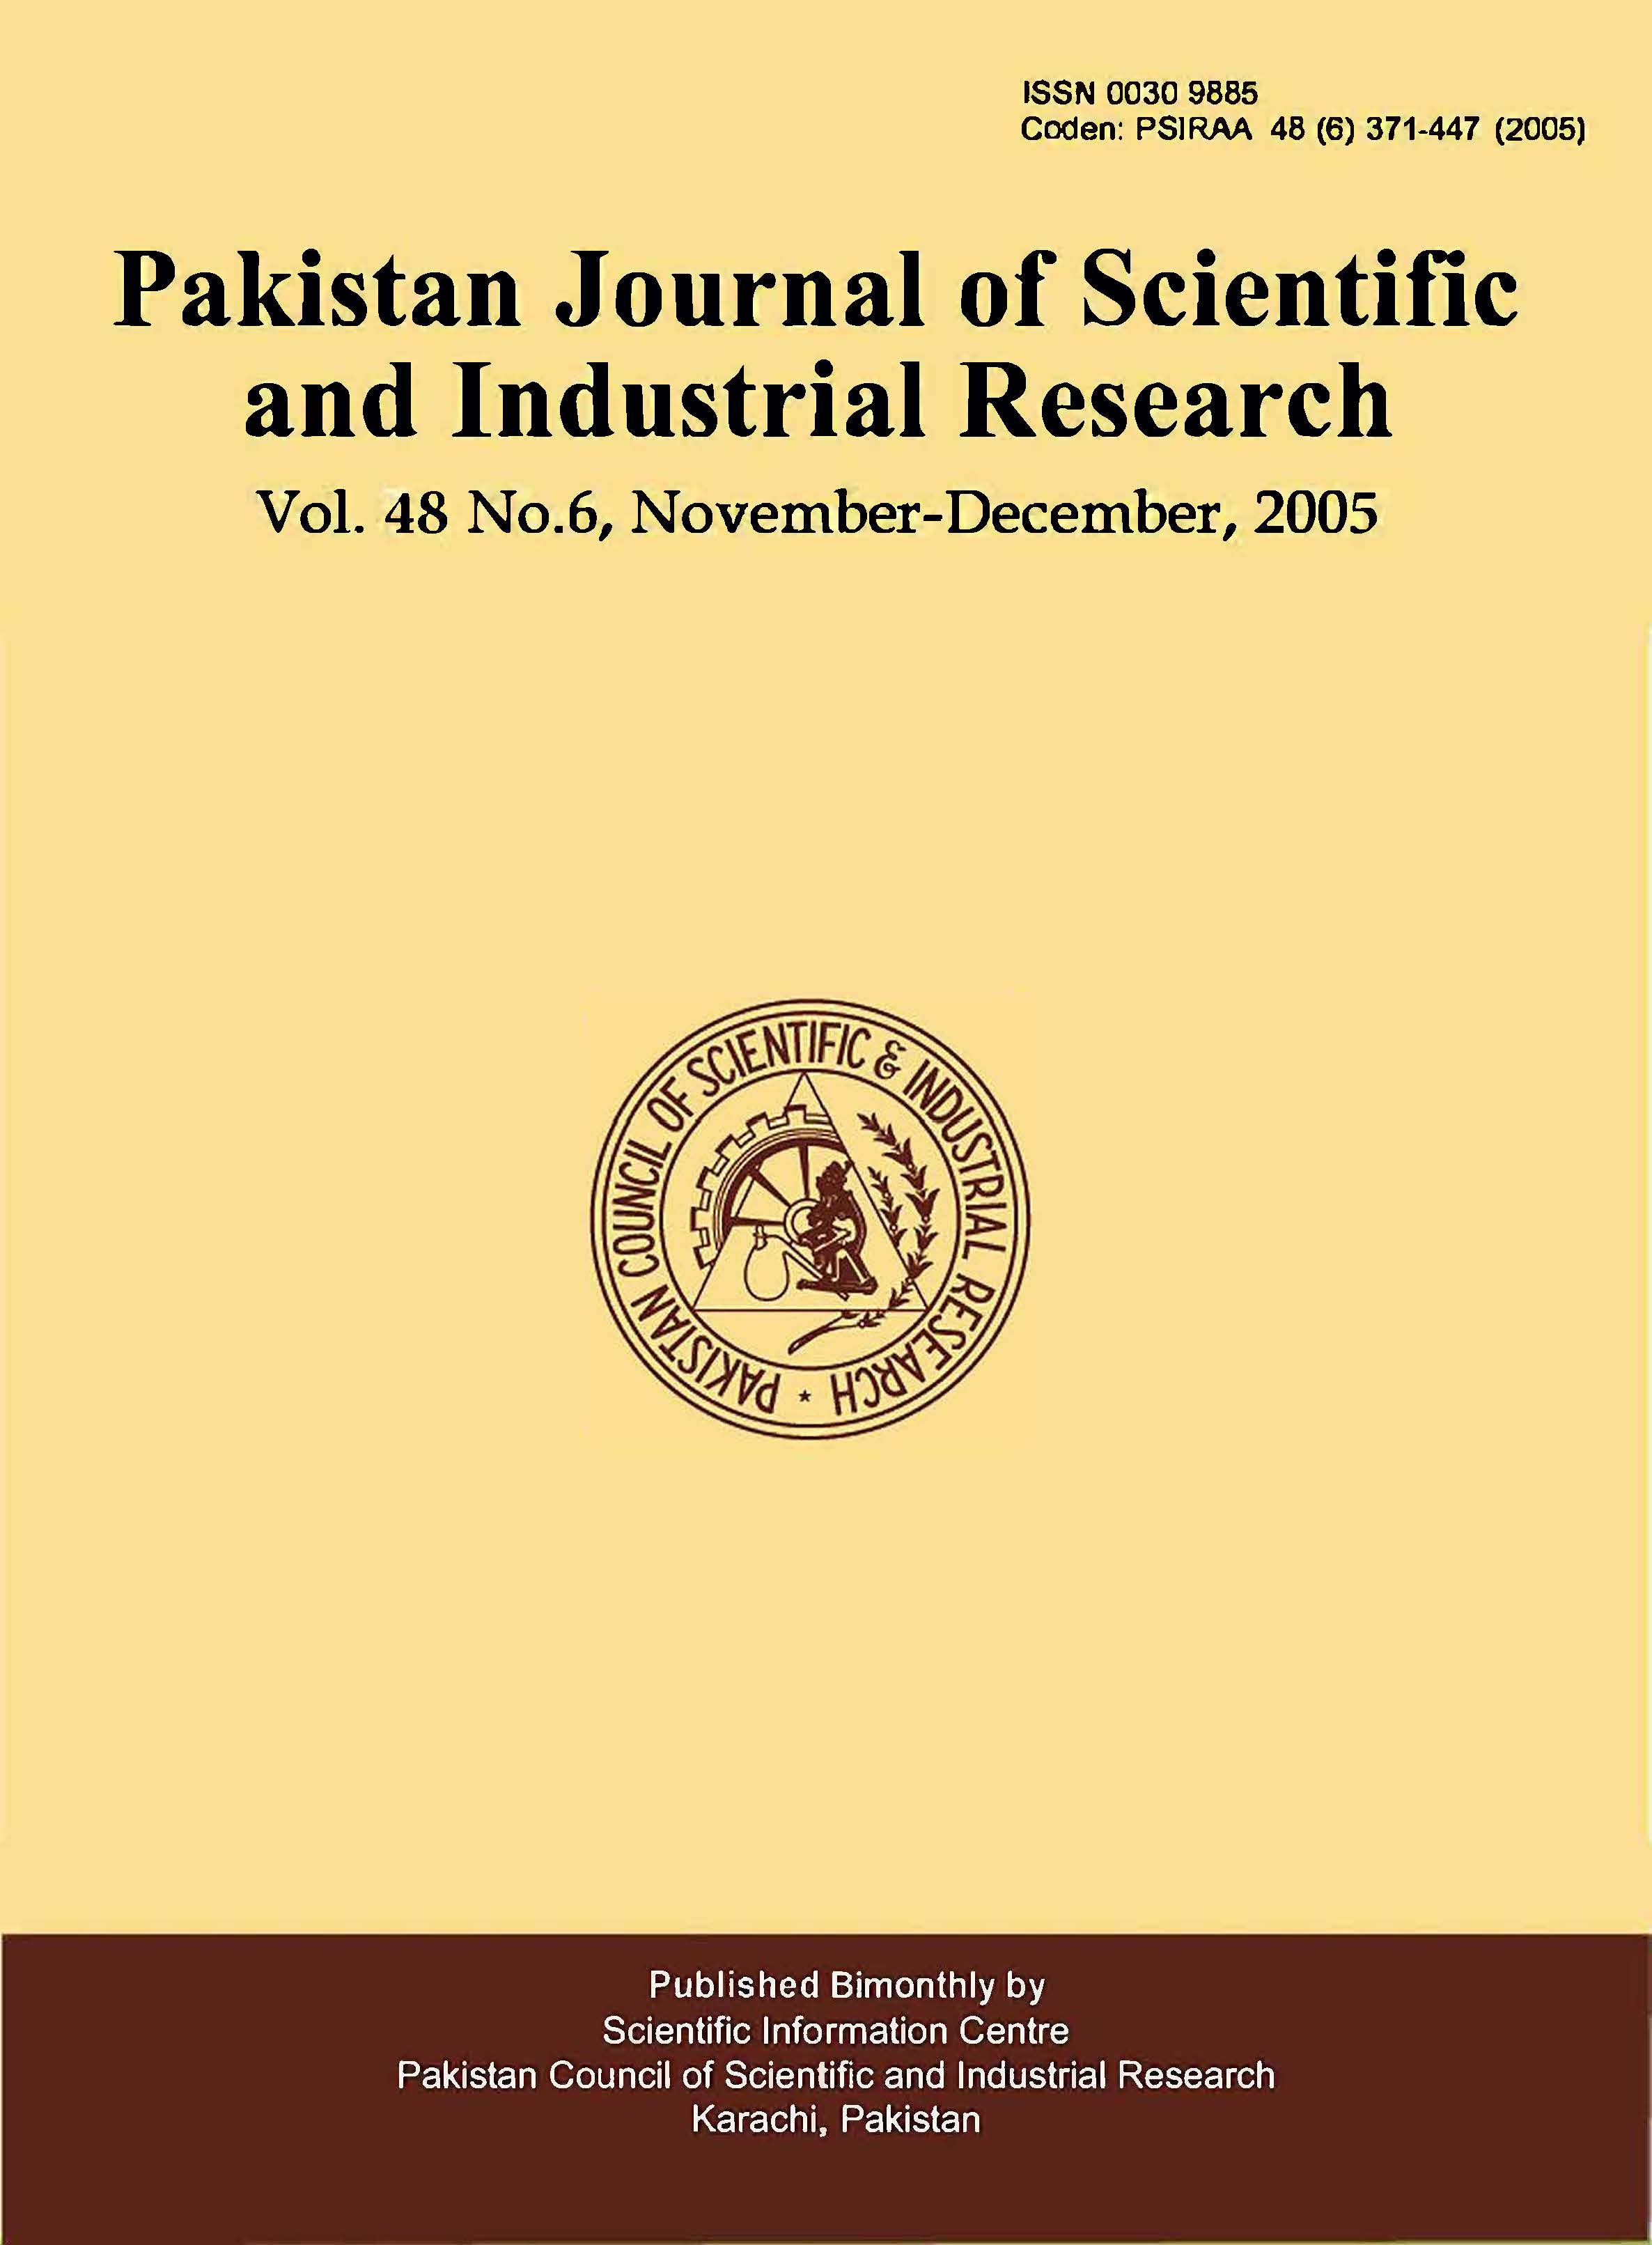 					View Vol. 48 No. 6 (2005): Pakistan Journal of Scientific and Industrial Research
				